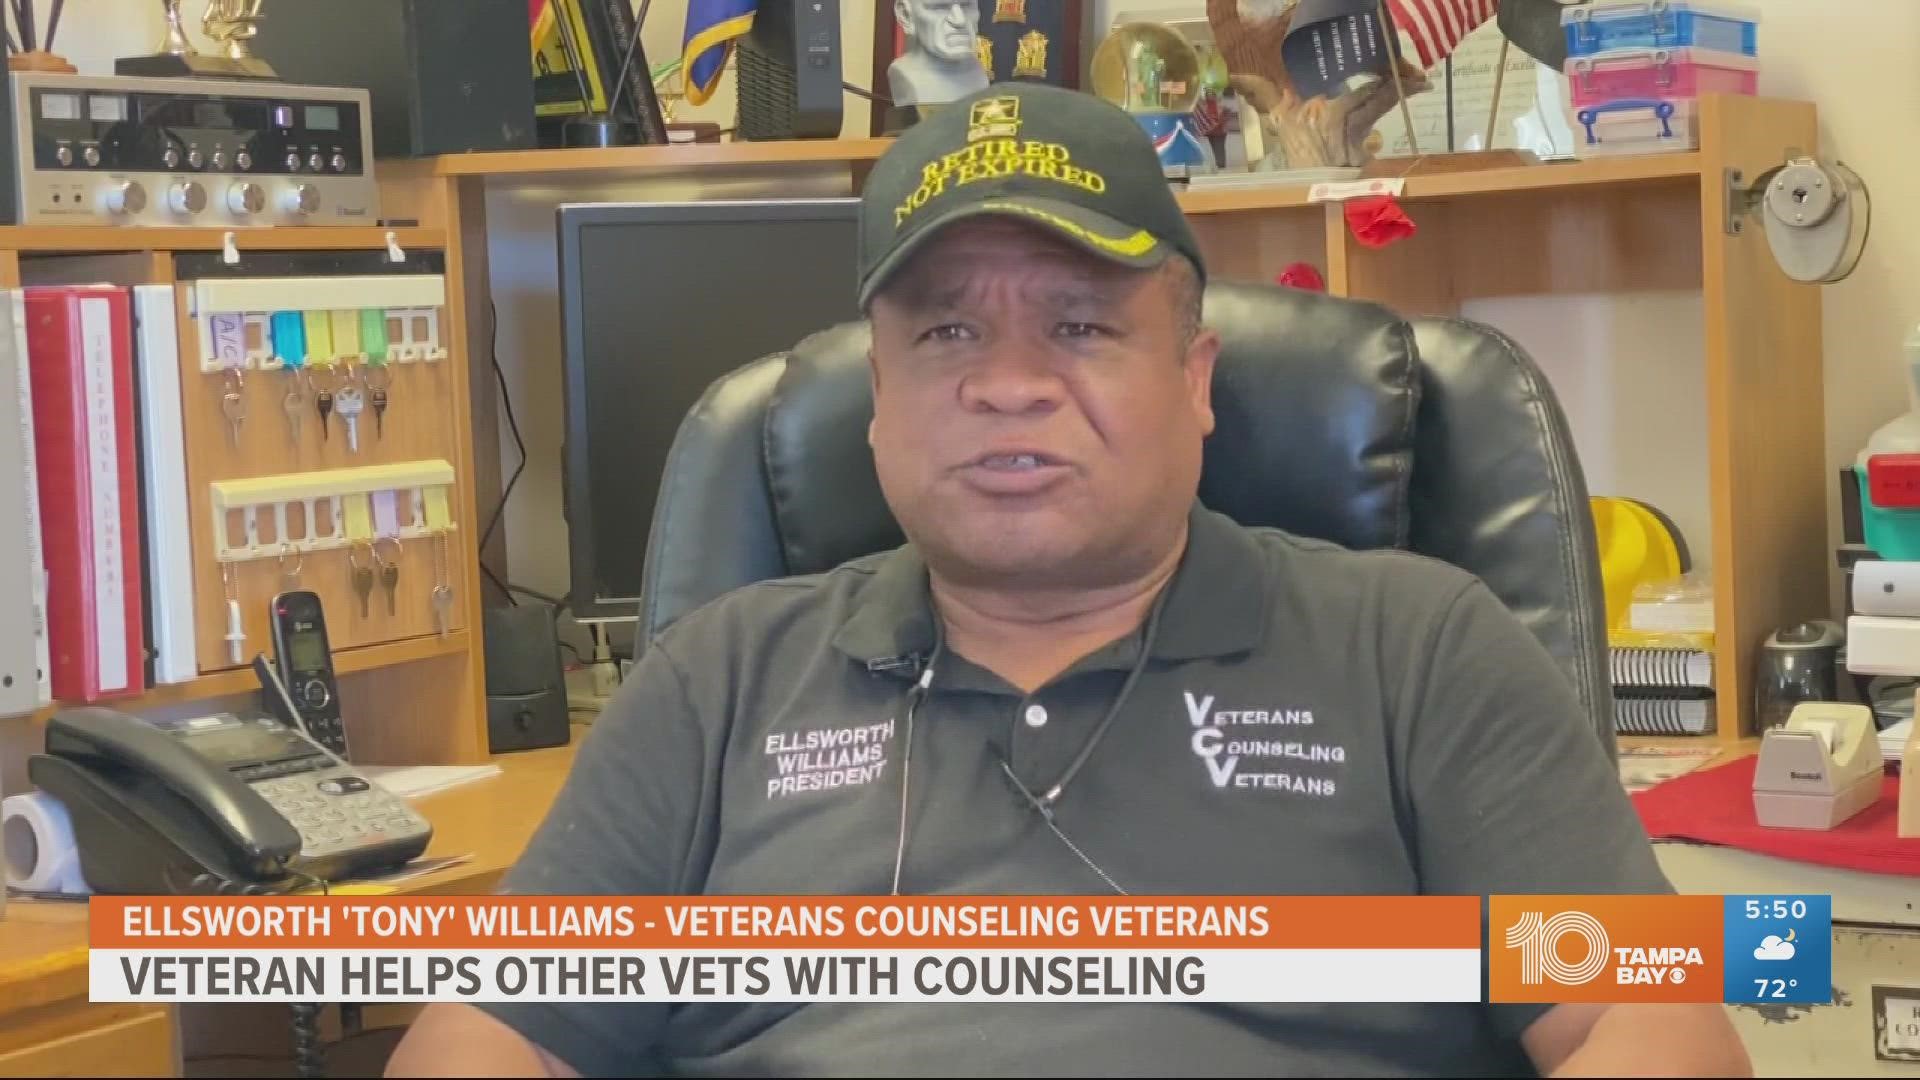 Veterans Counseling Veterans' primary mission is suicide prevention.